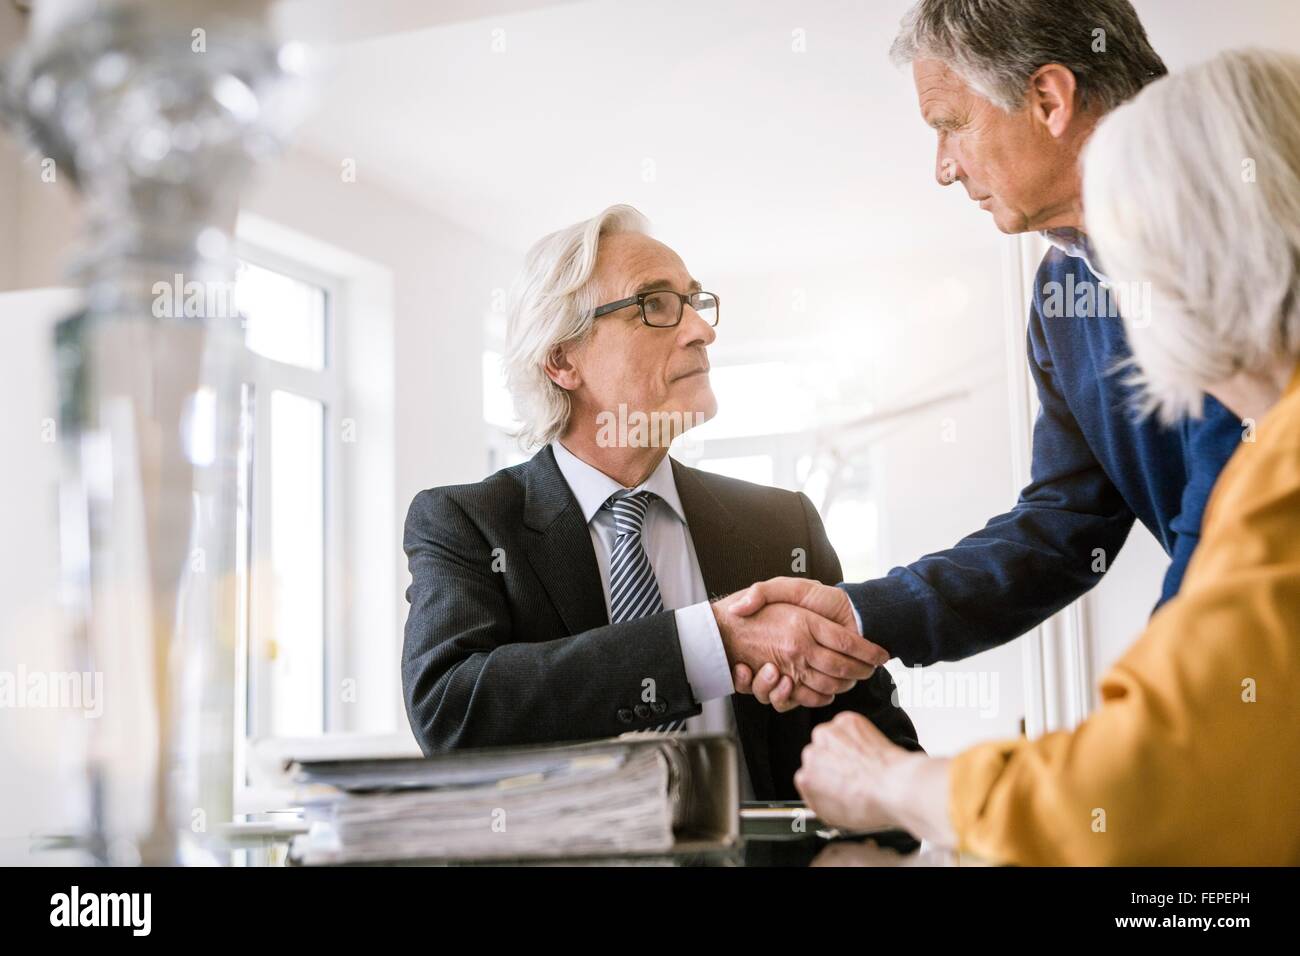 Senior adults in business meeting shaking hands Stock Photo